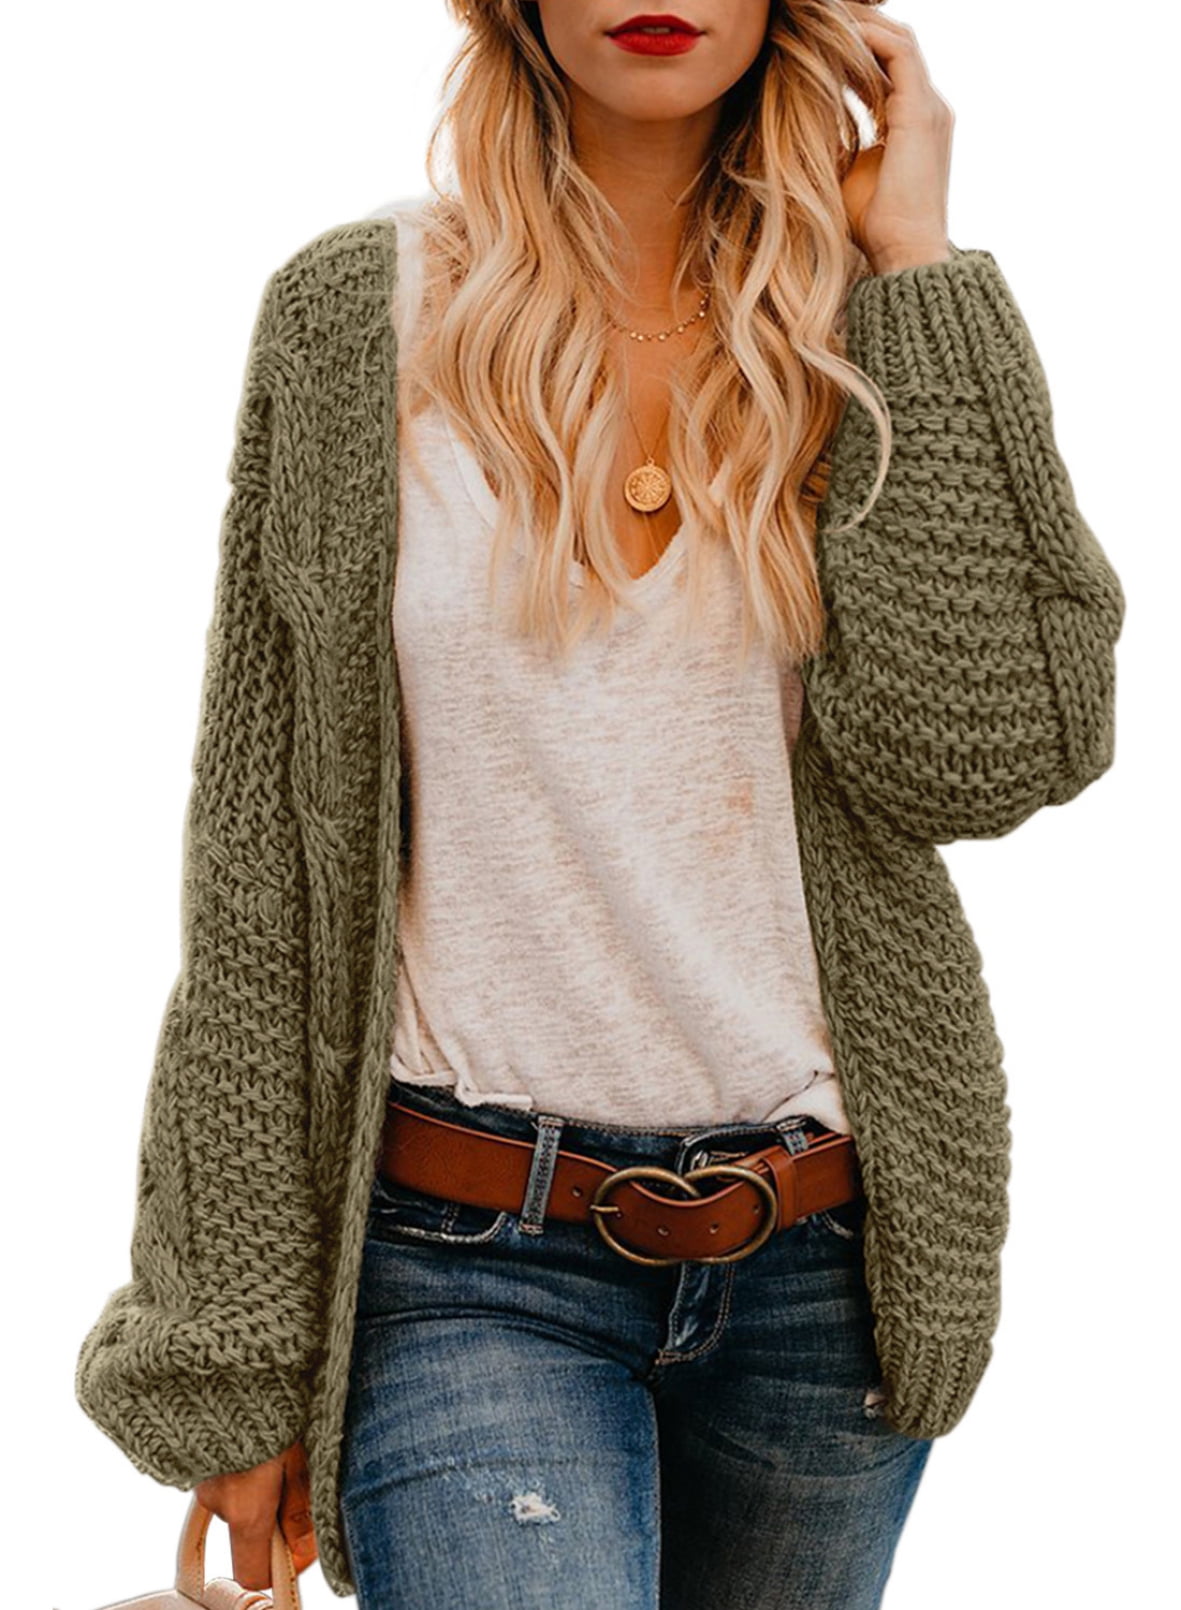 Aleumdr Womens Cable Knit Long Cardigan with Side Pockets Warm Coat Pullover Sweater 